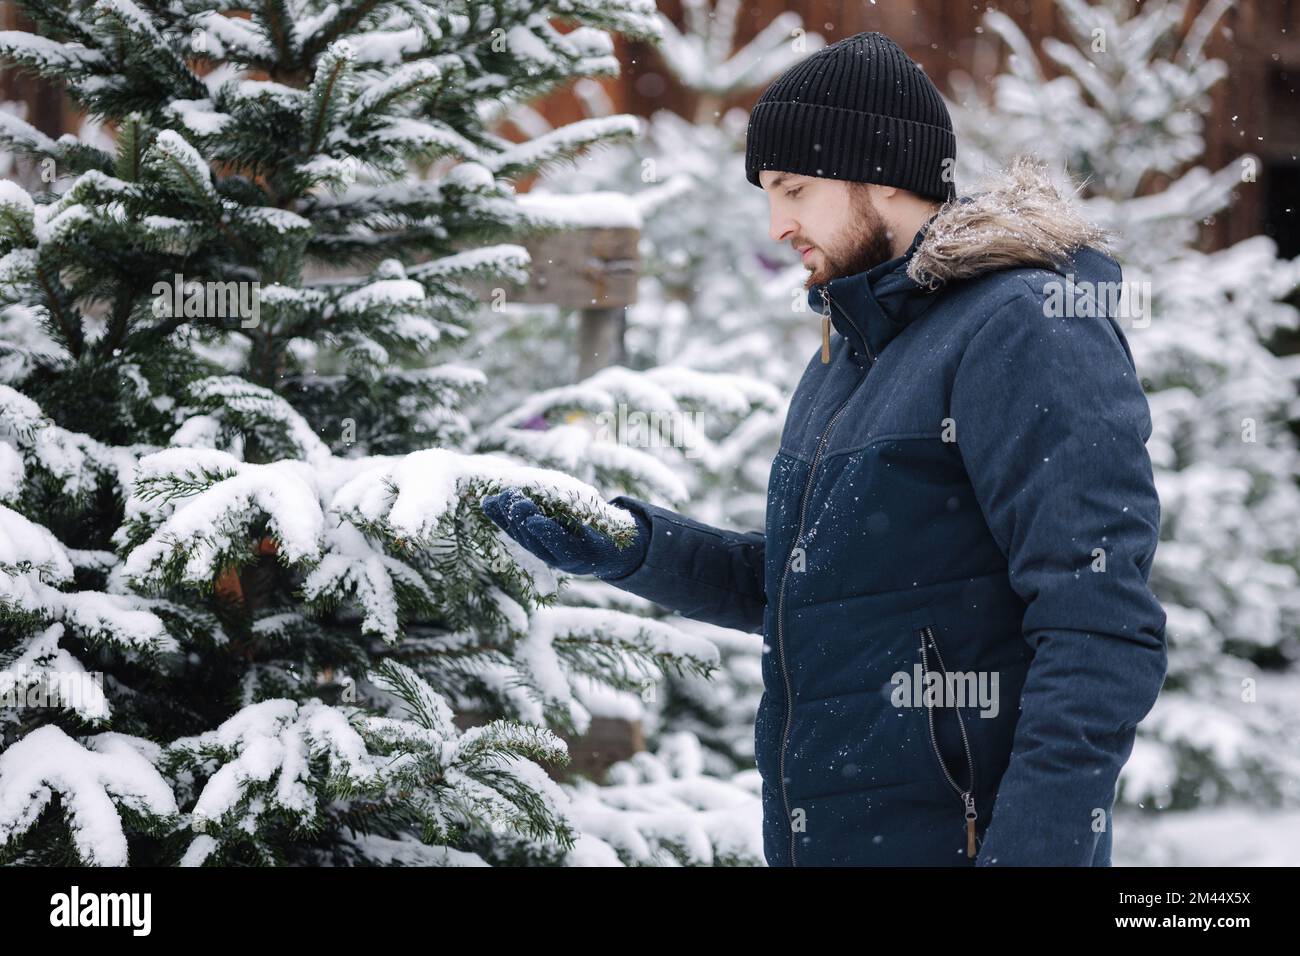 Handsome bearded man chooses a Christmas tree at the fair Stock Photo